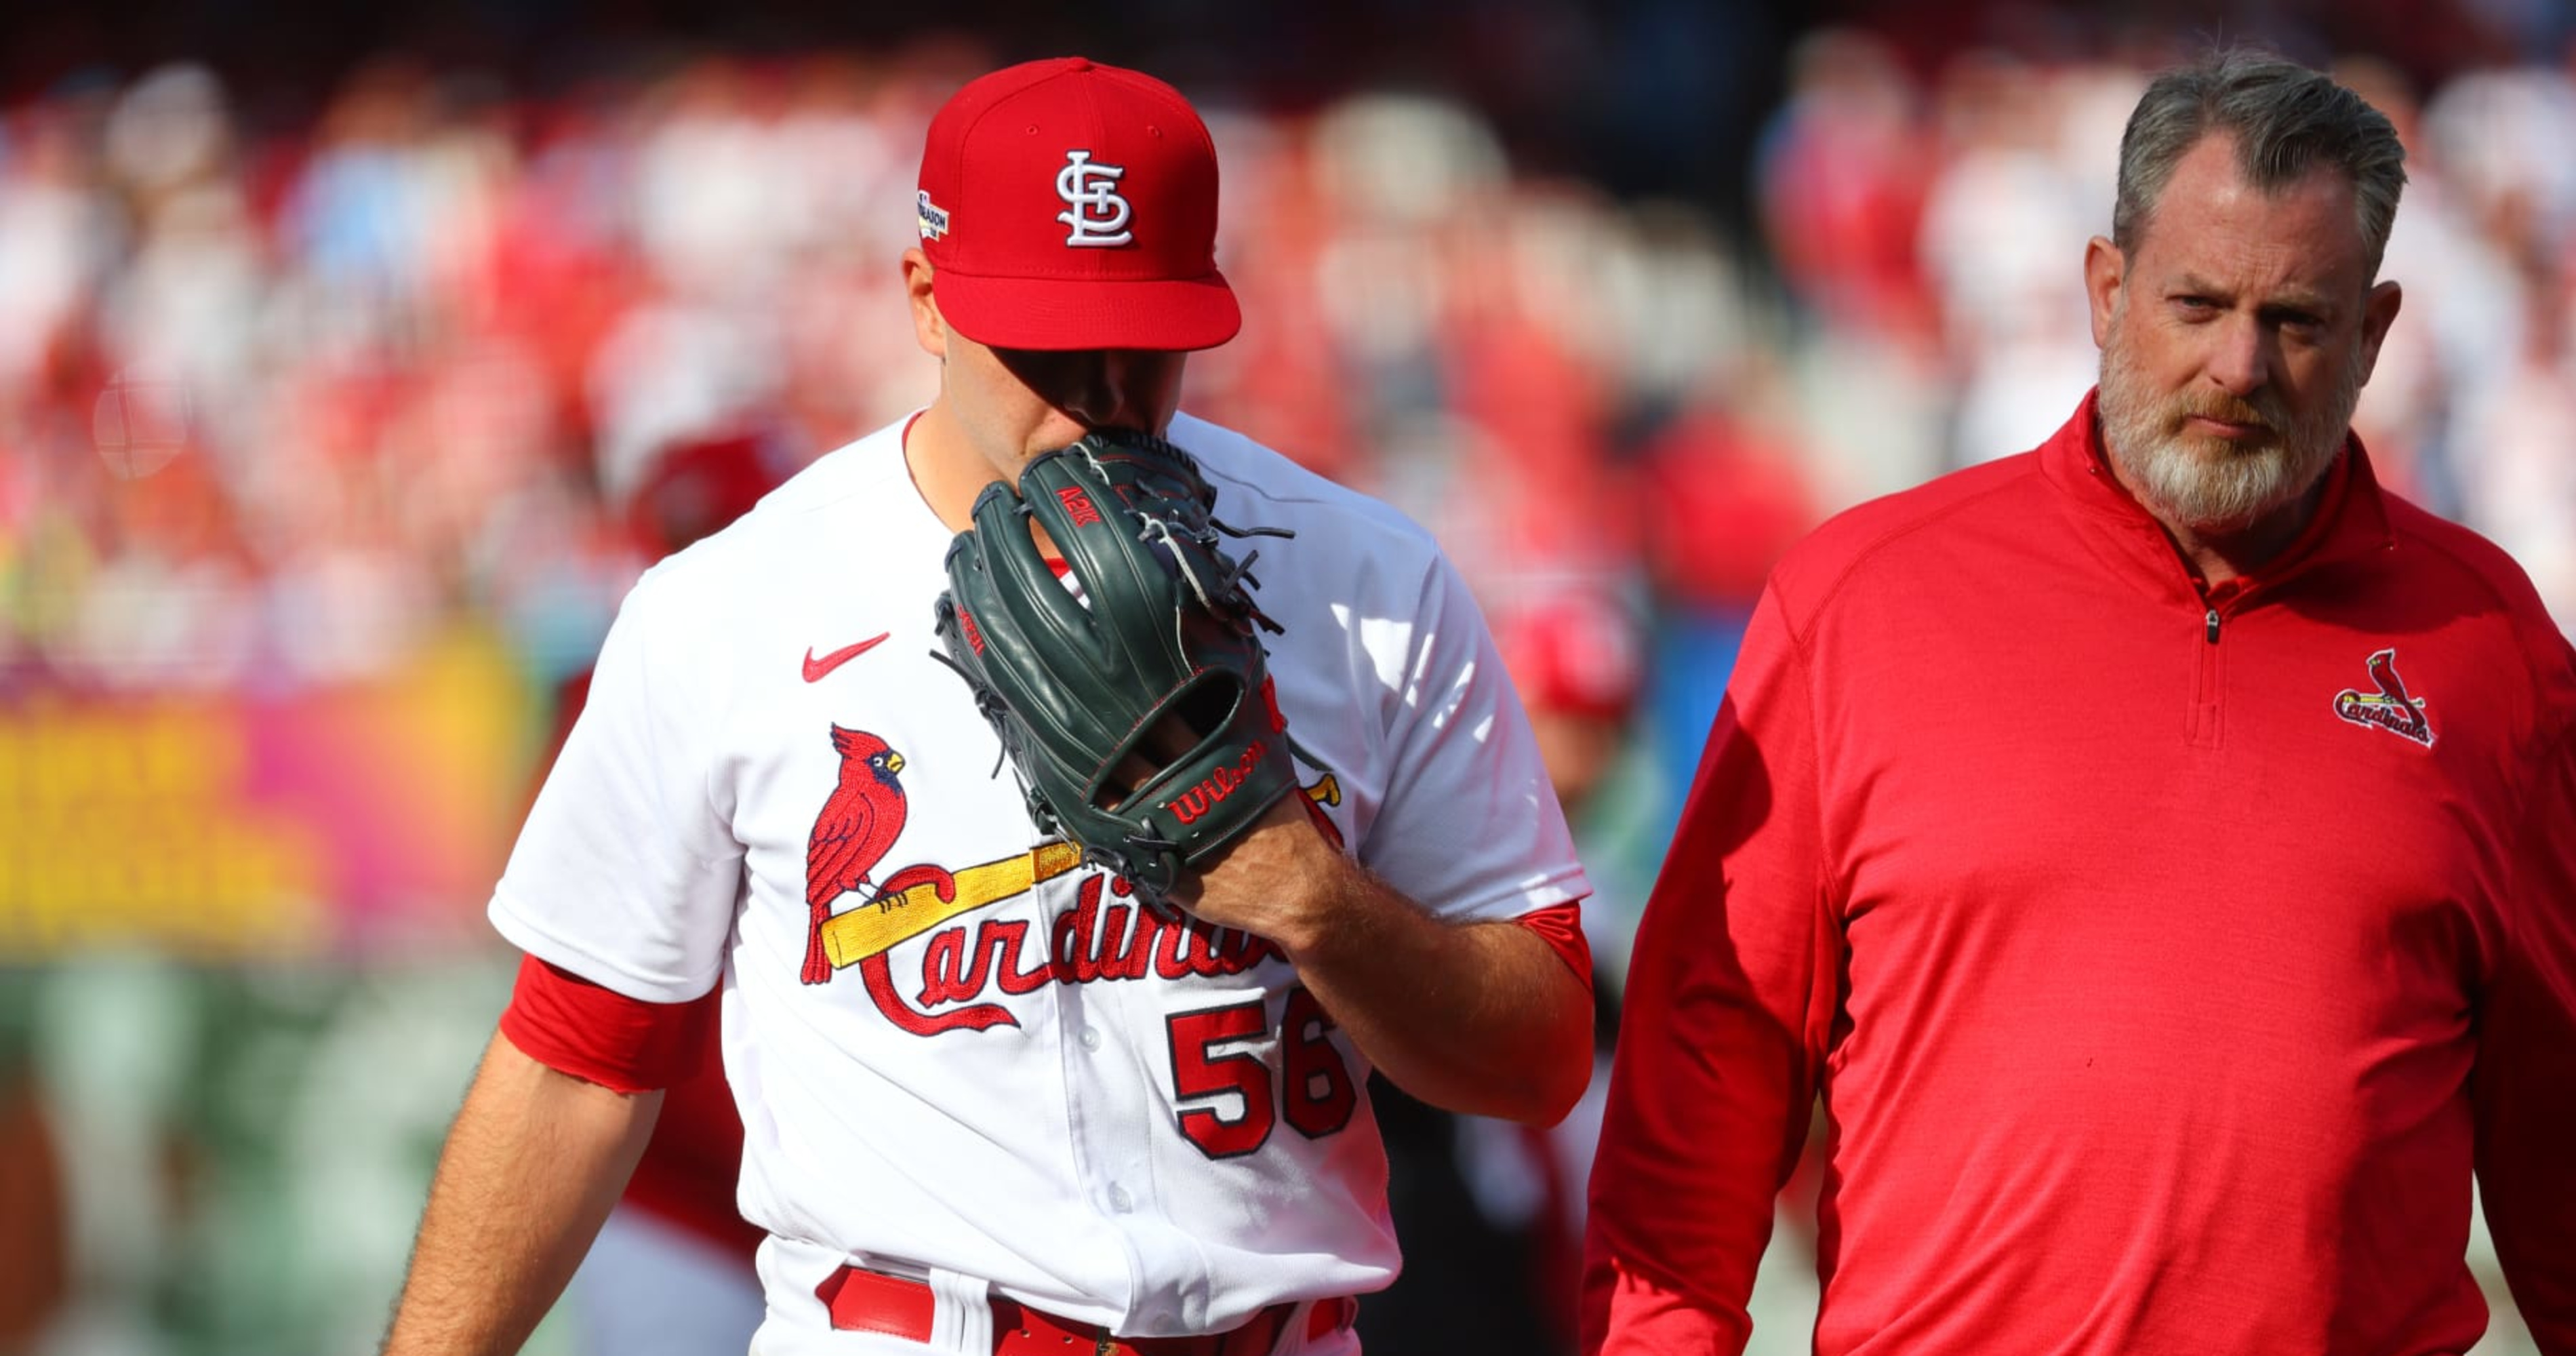 Cardinals' Ryan Helsley to Have Tests on Finger Injury After Game